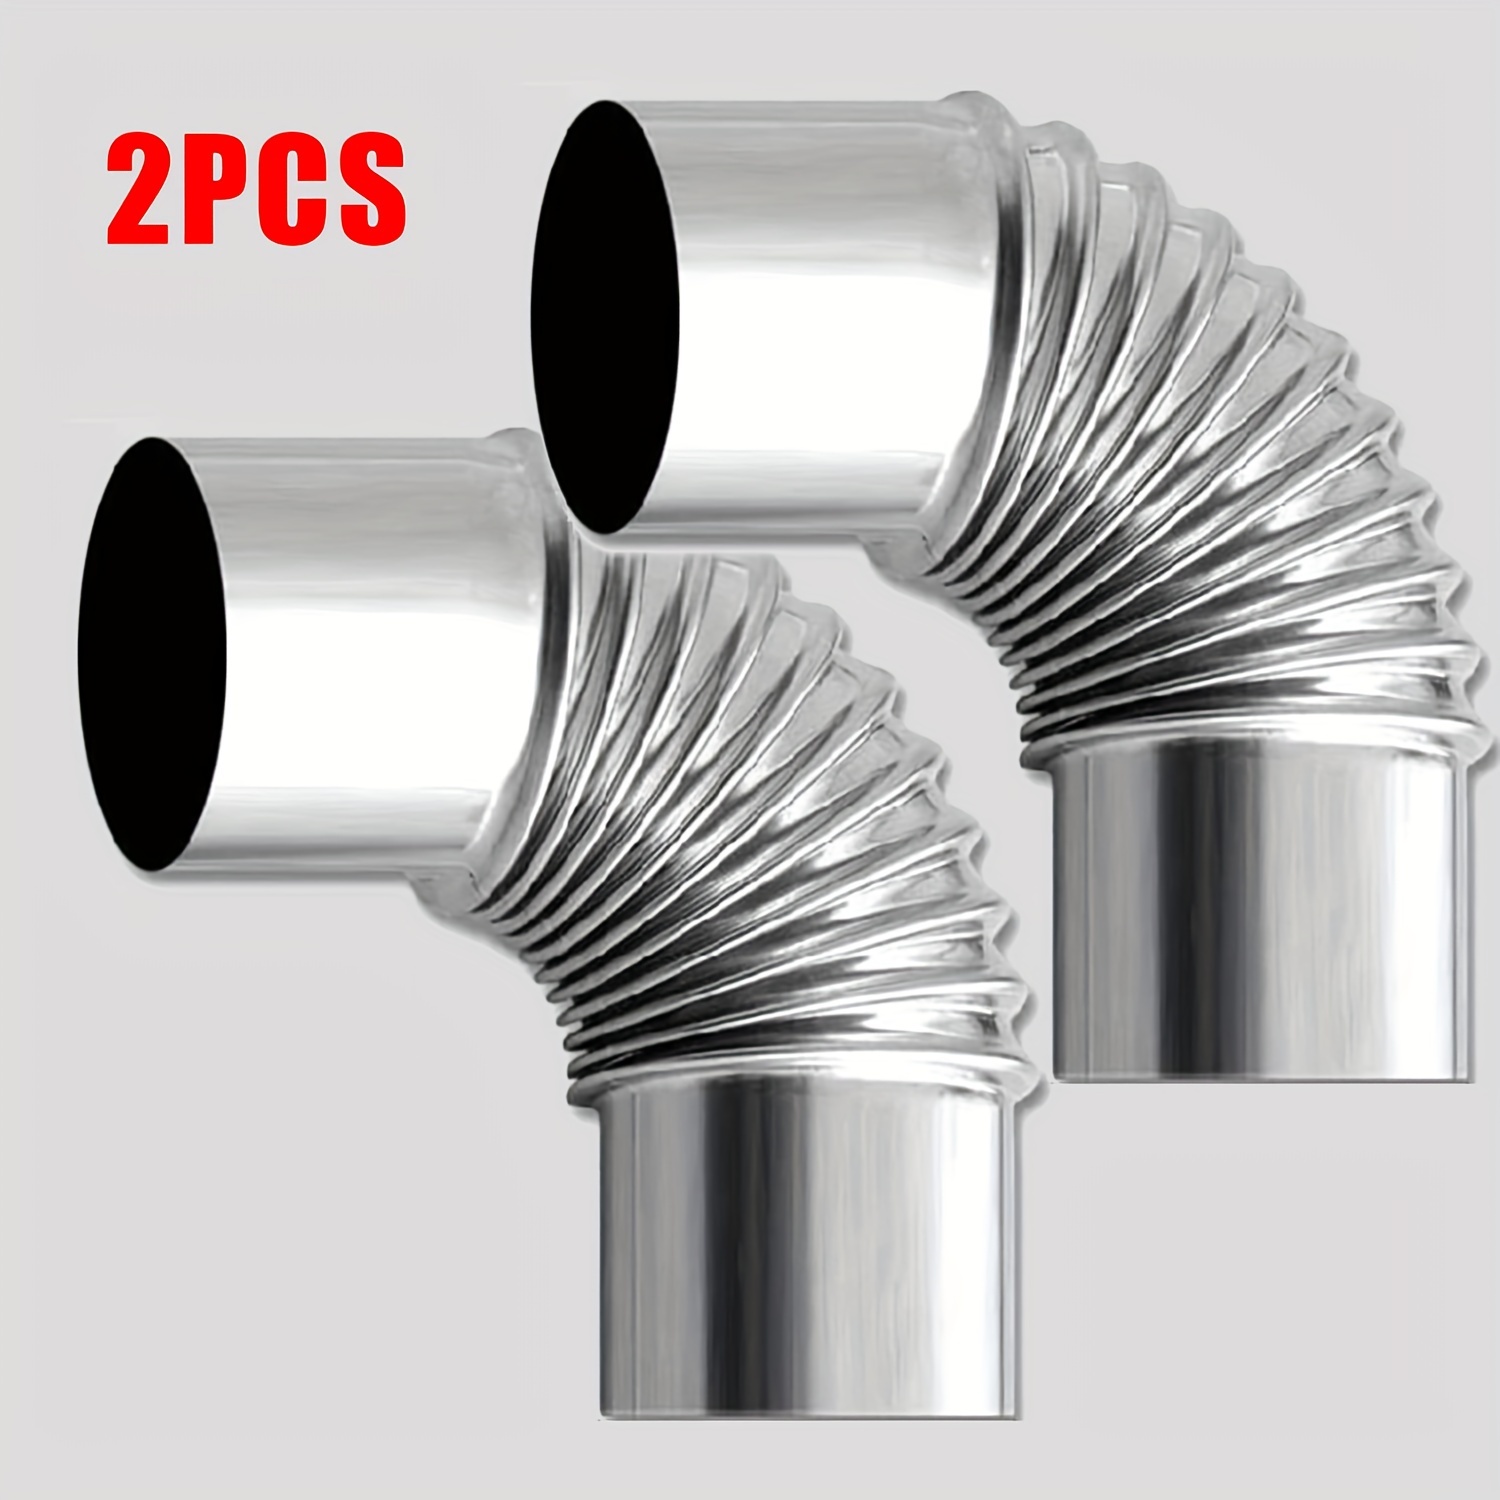 

2pcs, Elbow Pipe 90 Degree 2.36 Inch Stainless Steel Stove Pipes Elbow, Outdoor Camping Tent Stove Accessories, Wood Burning Stove Chimney Pipe Extension Exchange Flue Adapter Tube